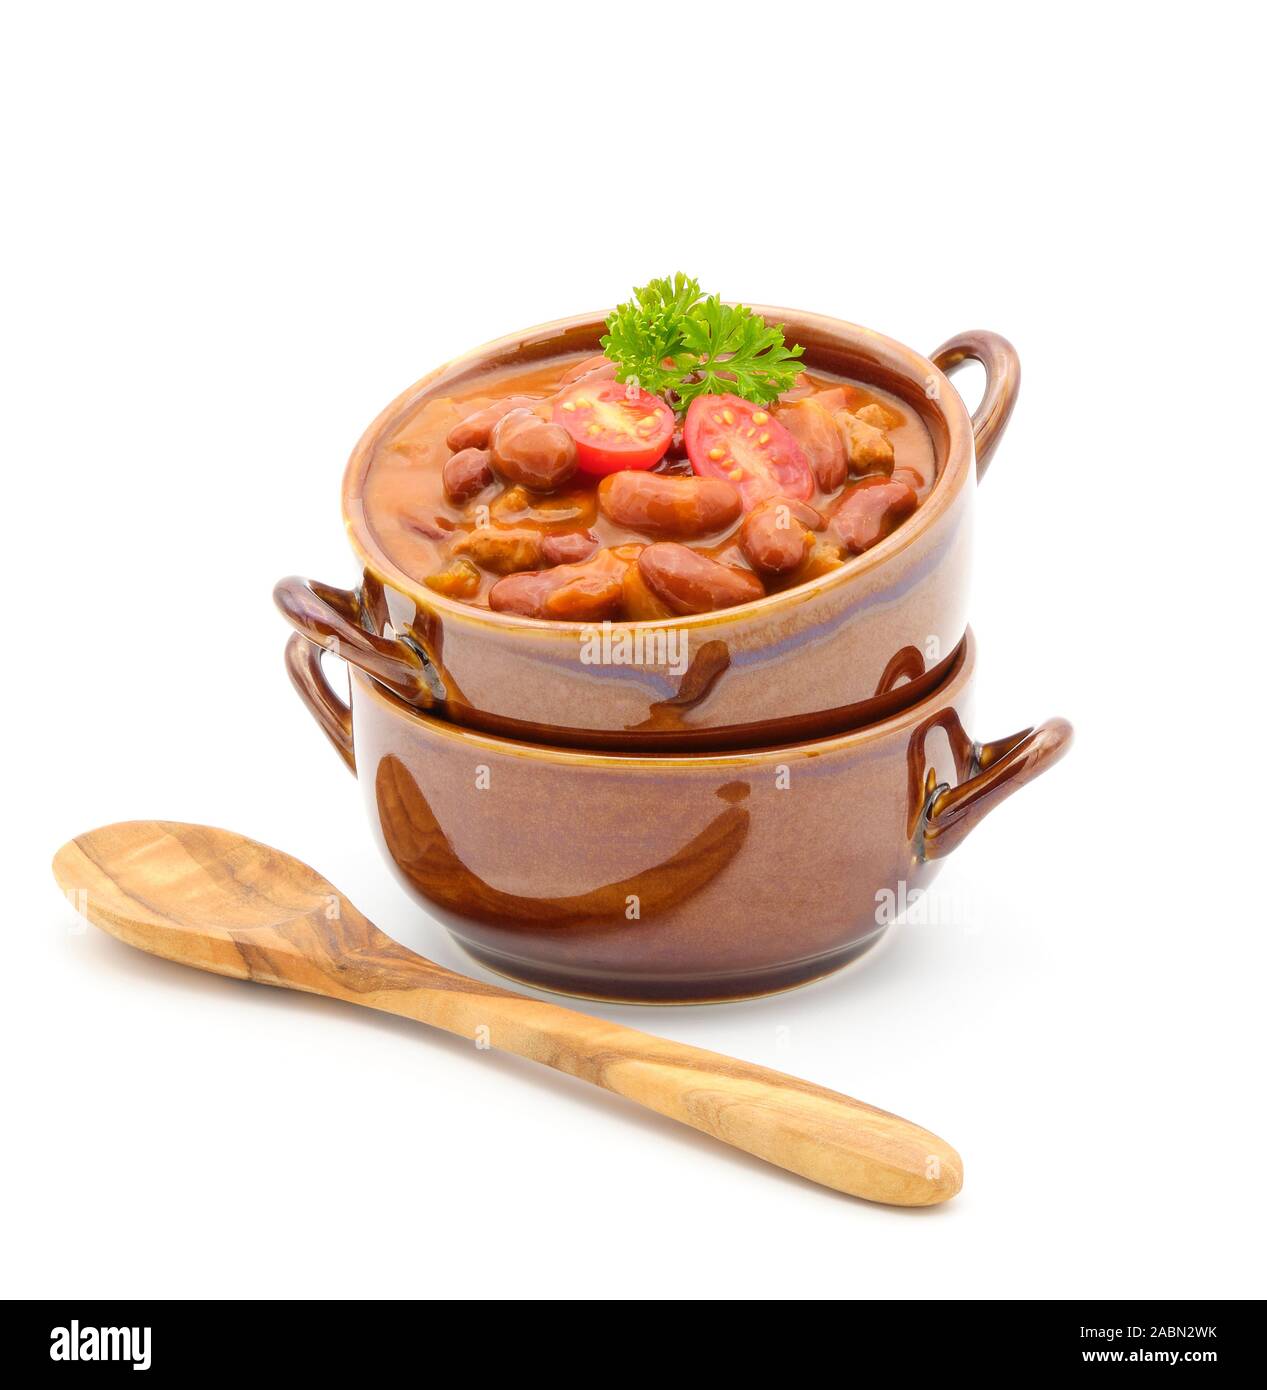 Bowl of delicious homemade chile photographed on a white background with copy space. Stock Photo